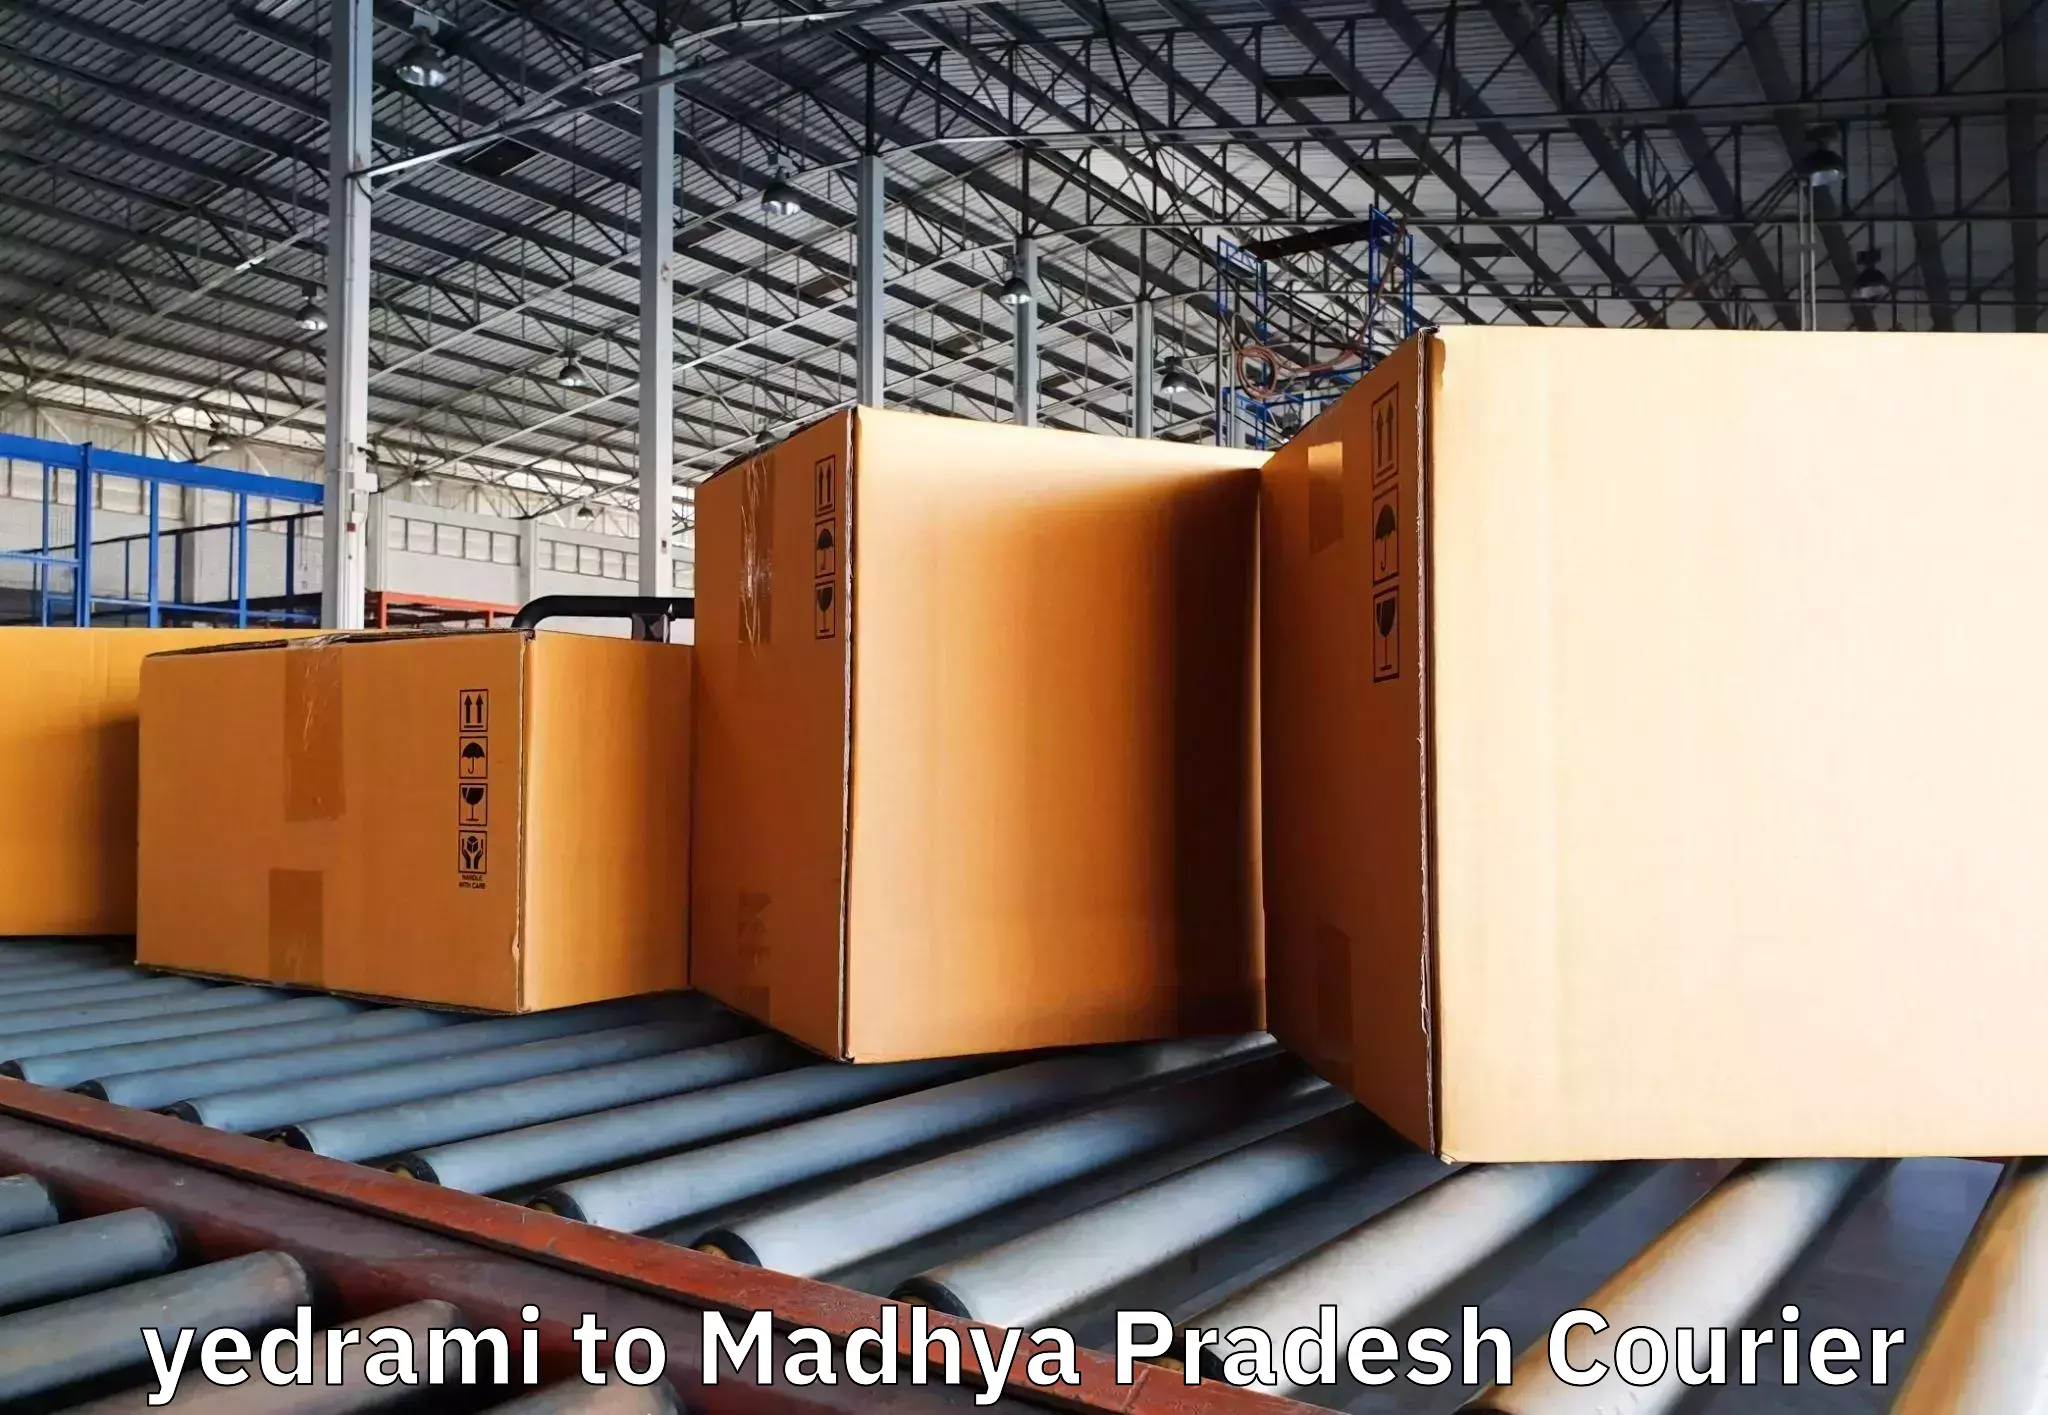 Professional moving company yedrami to Neemuch